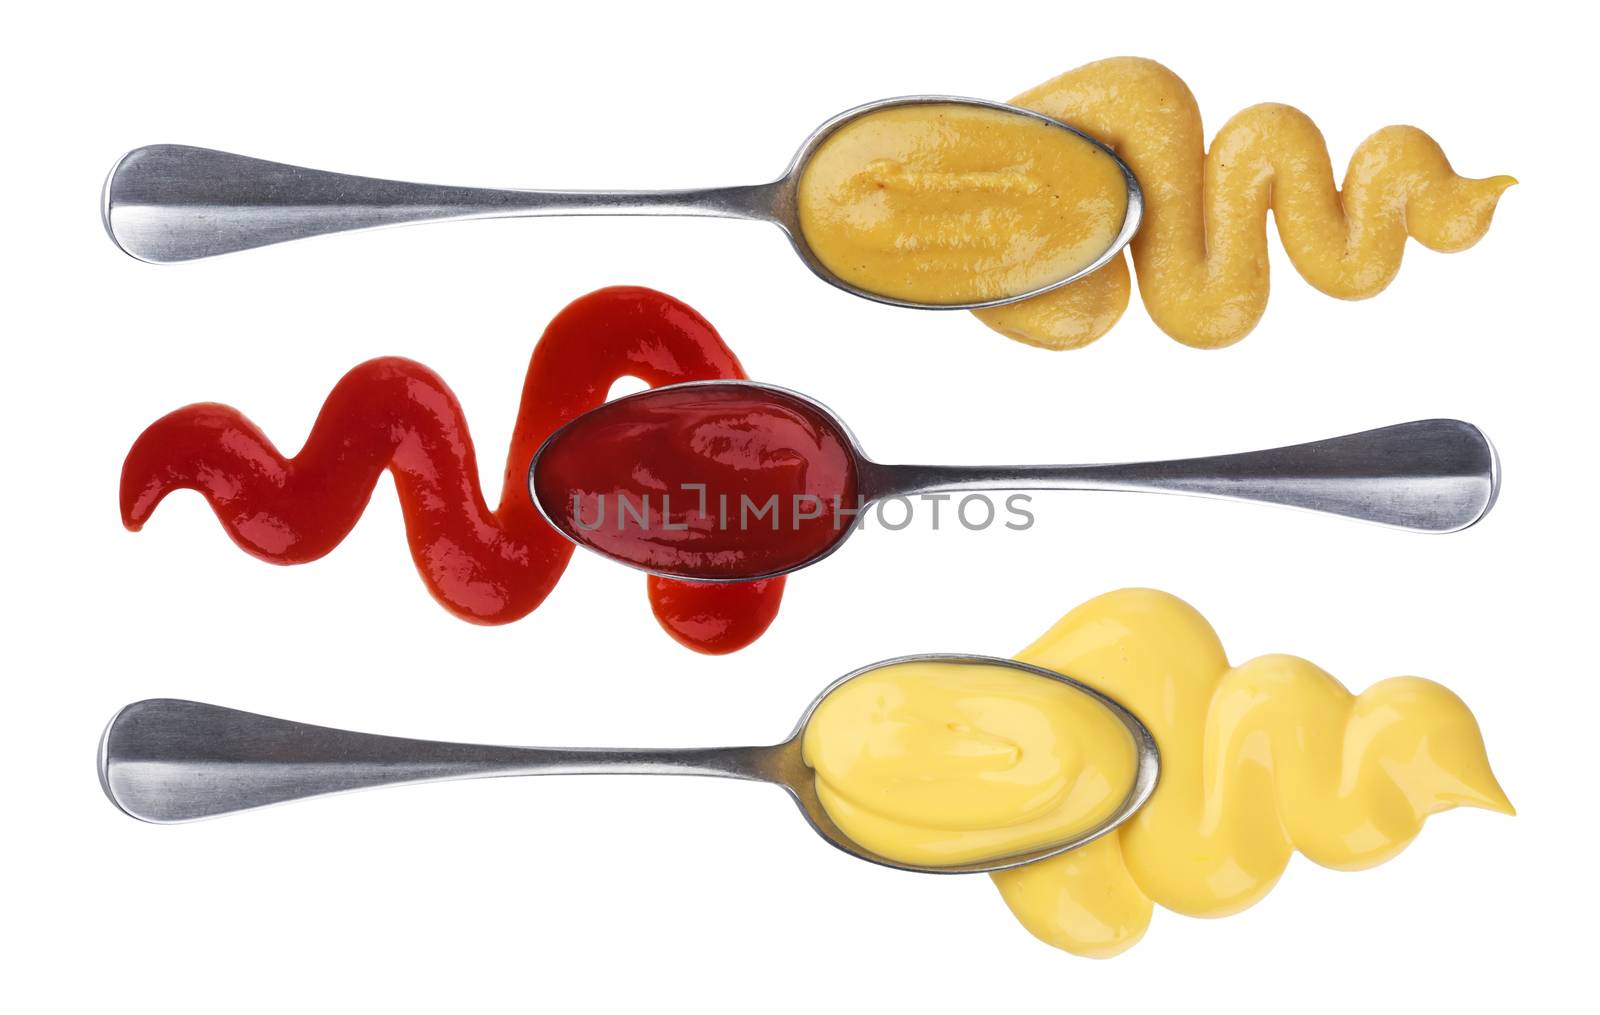 Ketchup, mayonnaise and mustard in spoons isolated on white background, sauces collection by xamtiw